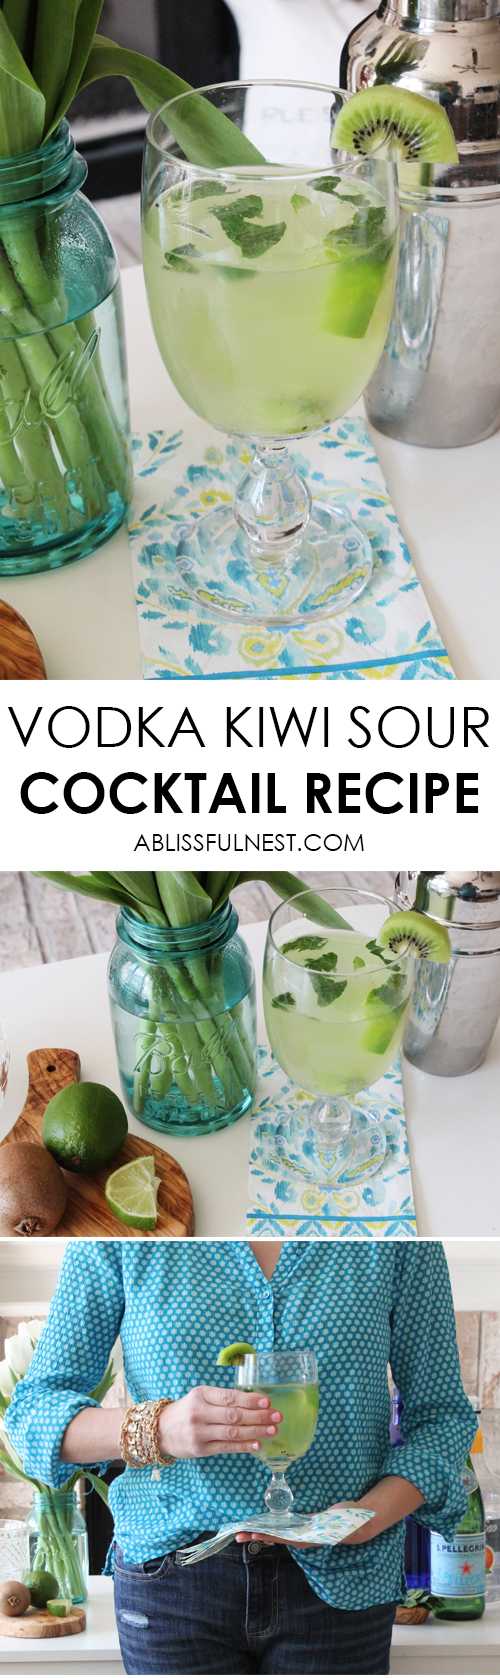 This delicious and refreshing cocktail recipe is perfect for your next gathering with friends. Entertain with this Vodka Kiwi Sour Cocktail Recipe for a unique twist for your dinner party. Recipe details on ablissfulnest.com